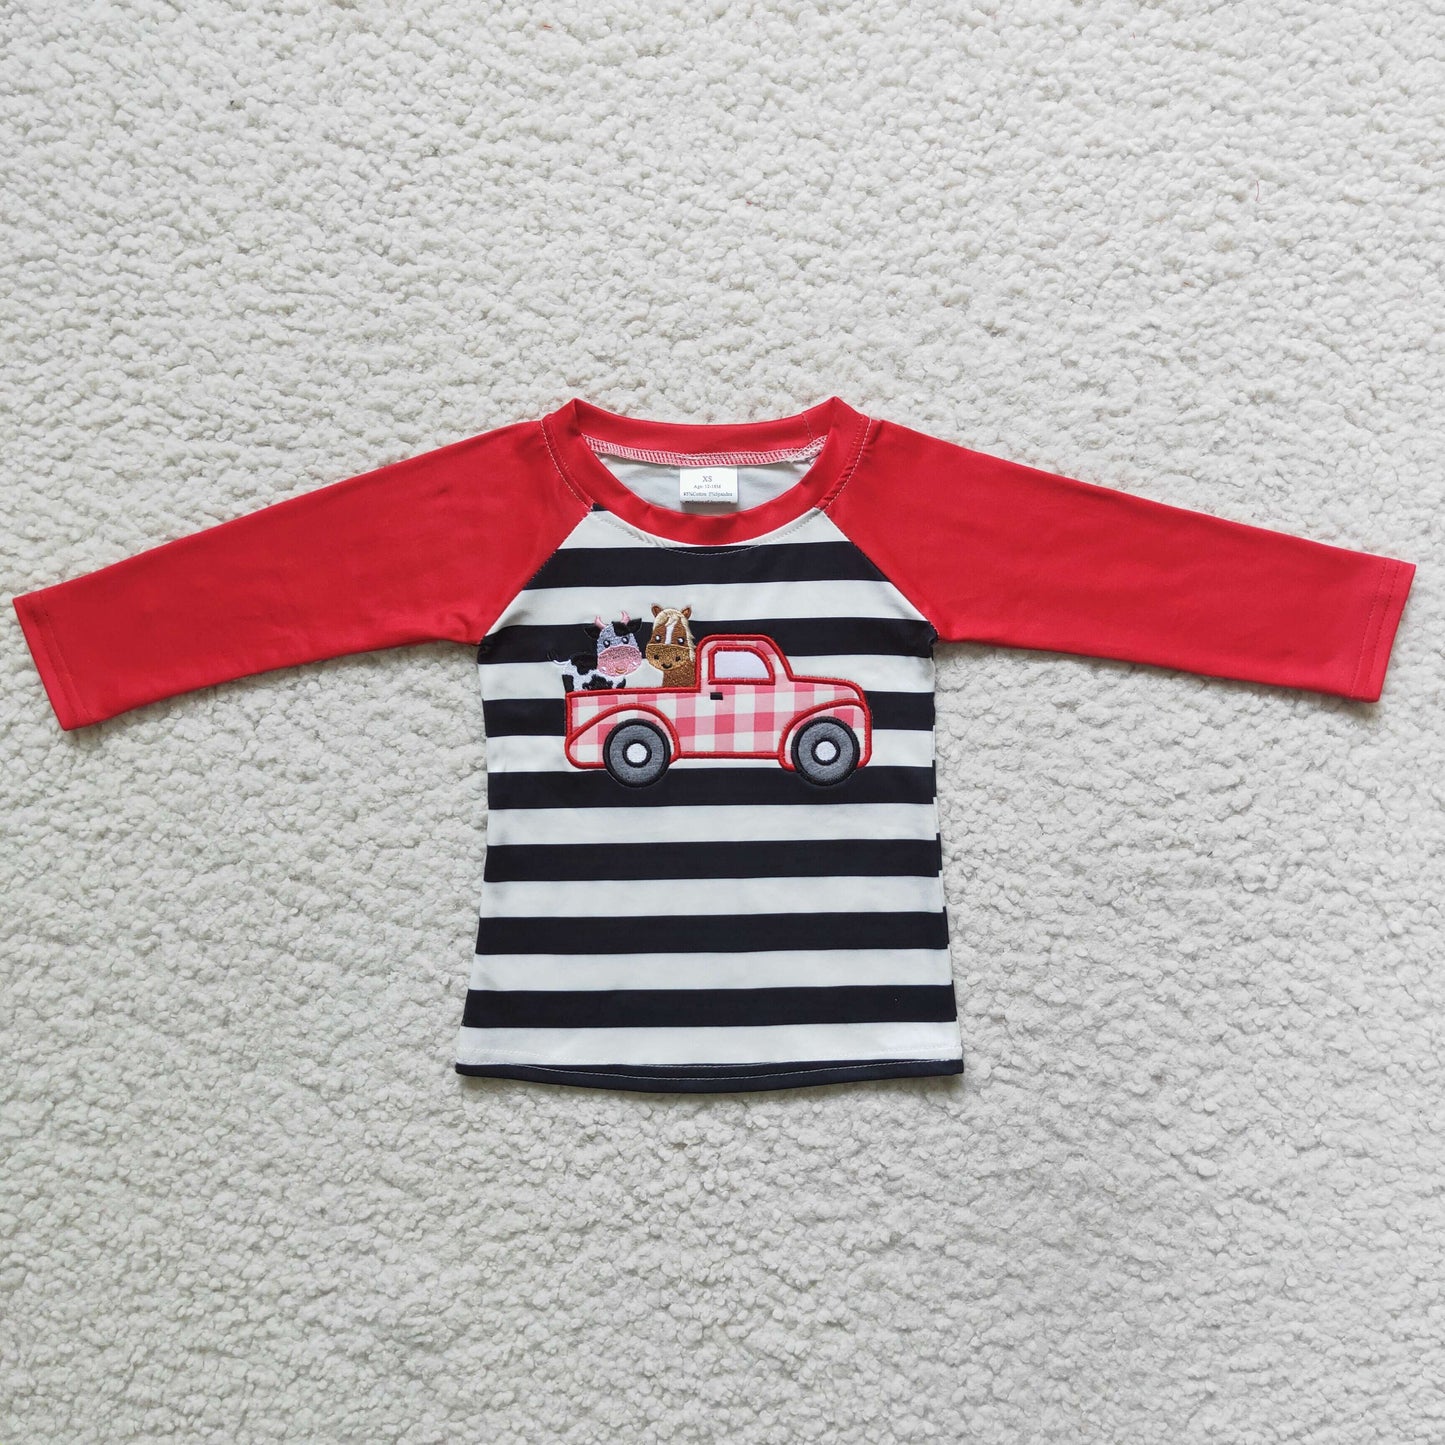 BT0023 Boys Embroidered Truck Long Sleeve Top